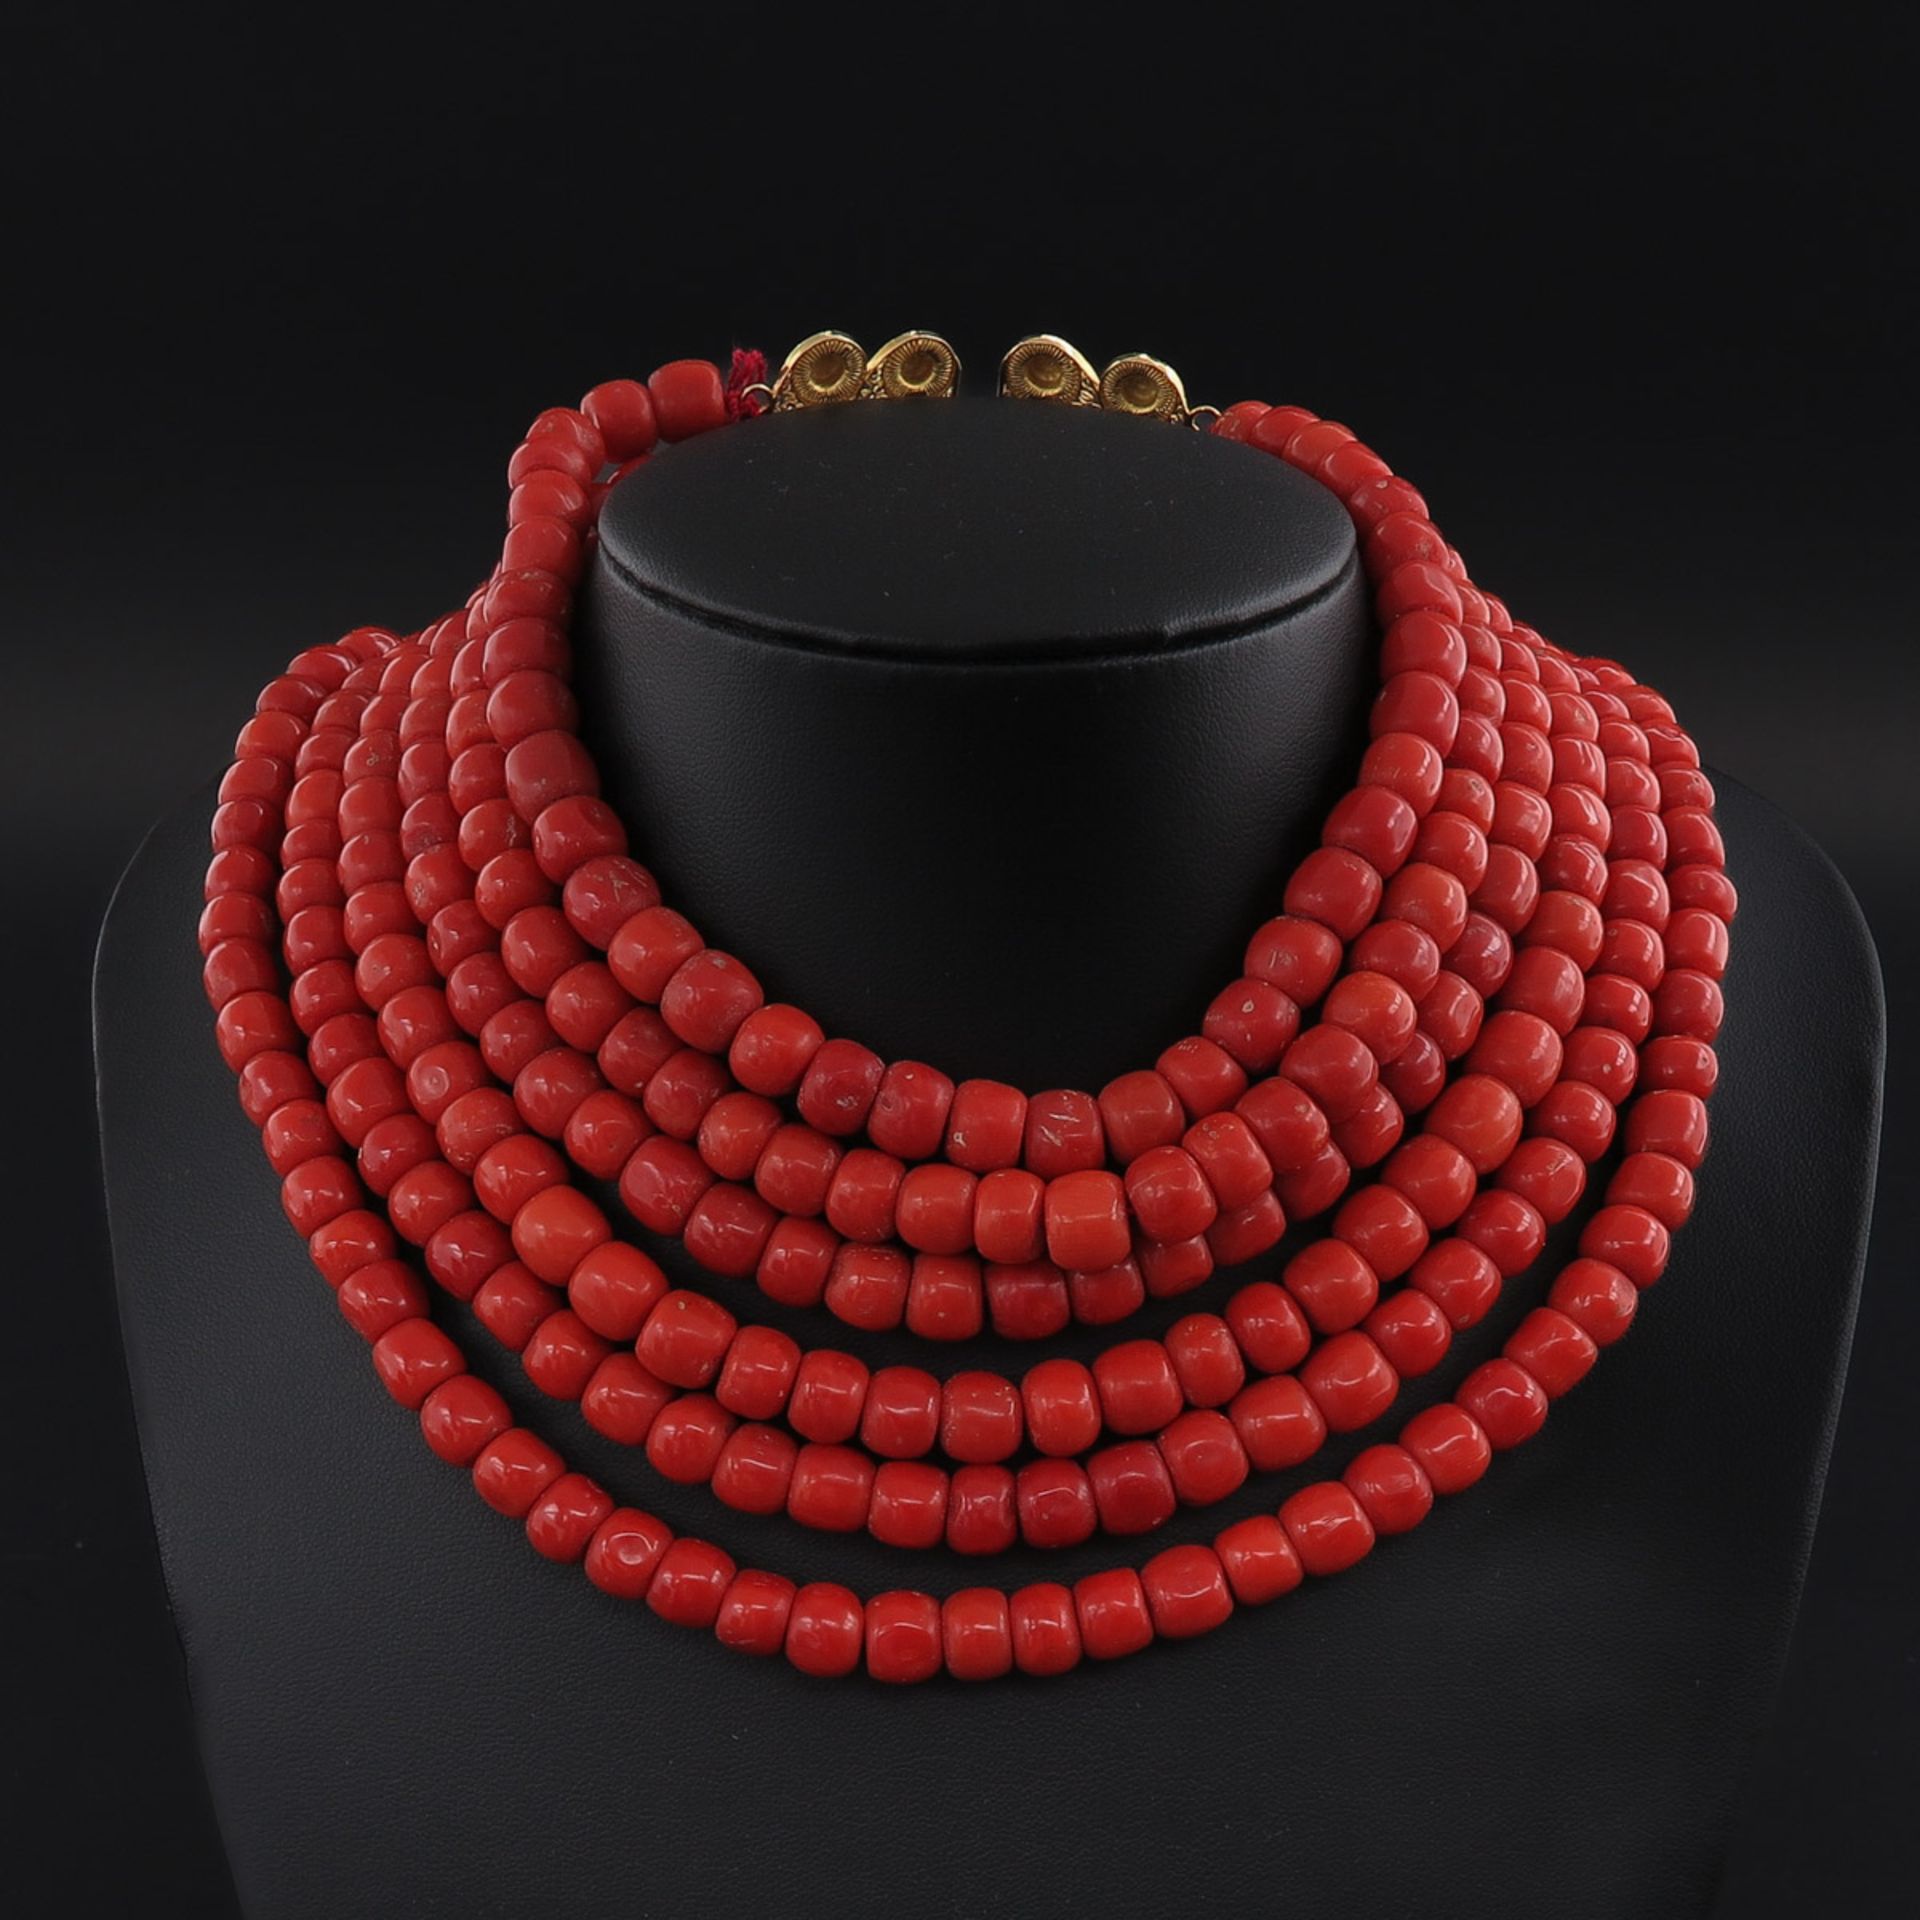 A 19th Century 6 Strand Red Coral Necklace on 18KG Clasp - Image 4 of 4